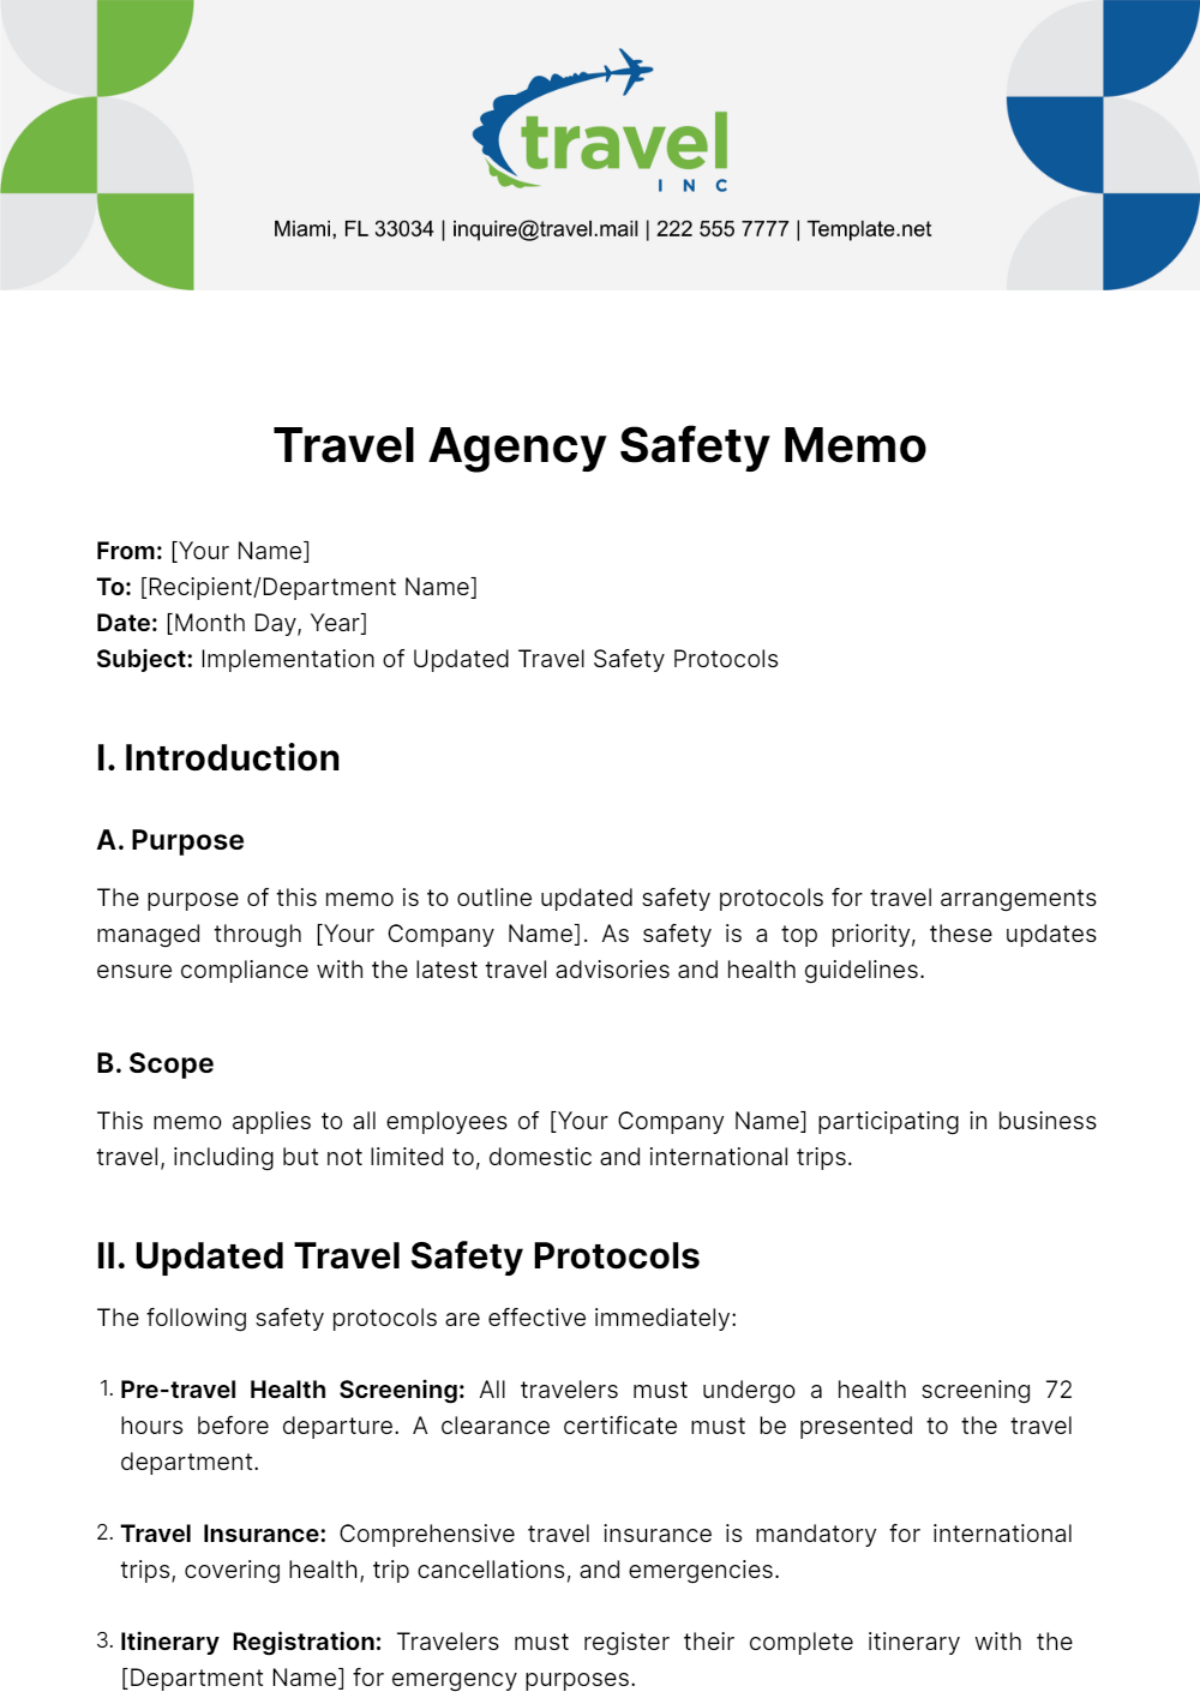 Free Travel Agency Safety Memo Template